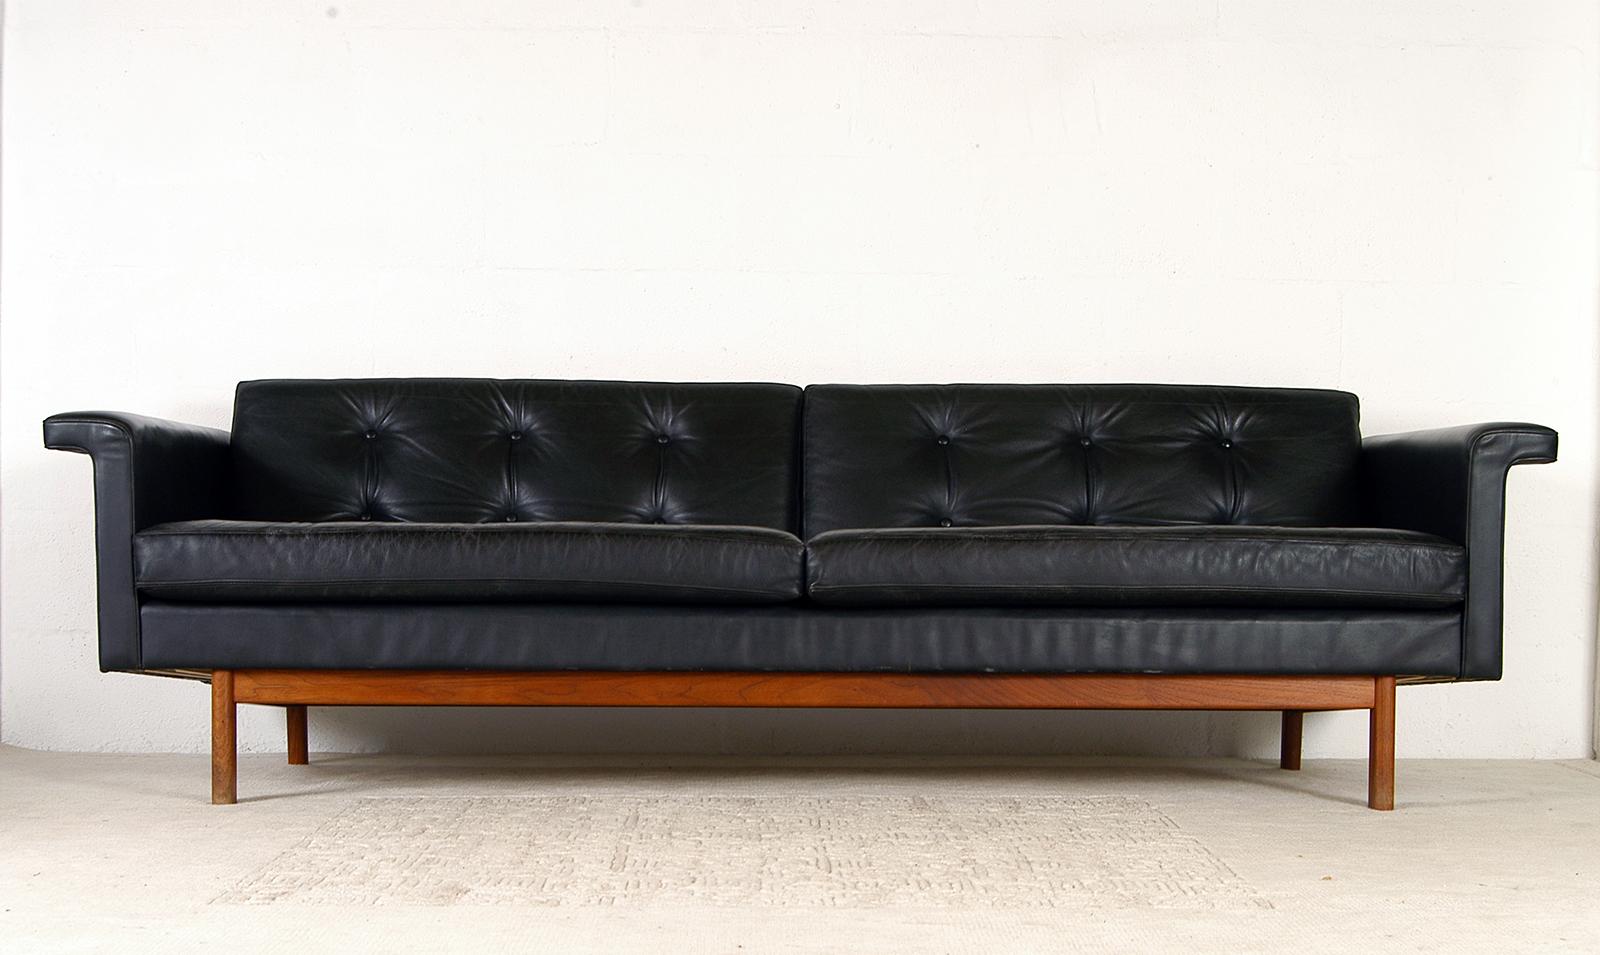 Designed by Karl-Erik Ekselius and produced by J.O Carlsson of Vetlanda, this sumptuous black leather sofa is quite clearly a Modernist designers interpretation of a Classic English ‘Chesterfield’ sofa with its deep button tufted upholstery, rolled